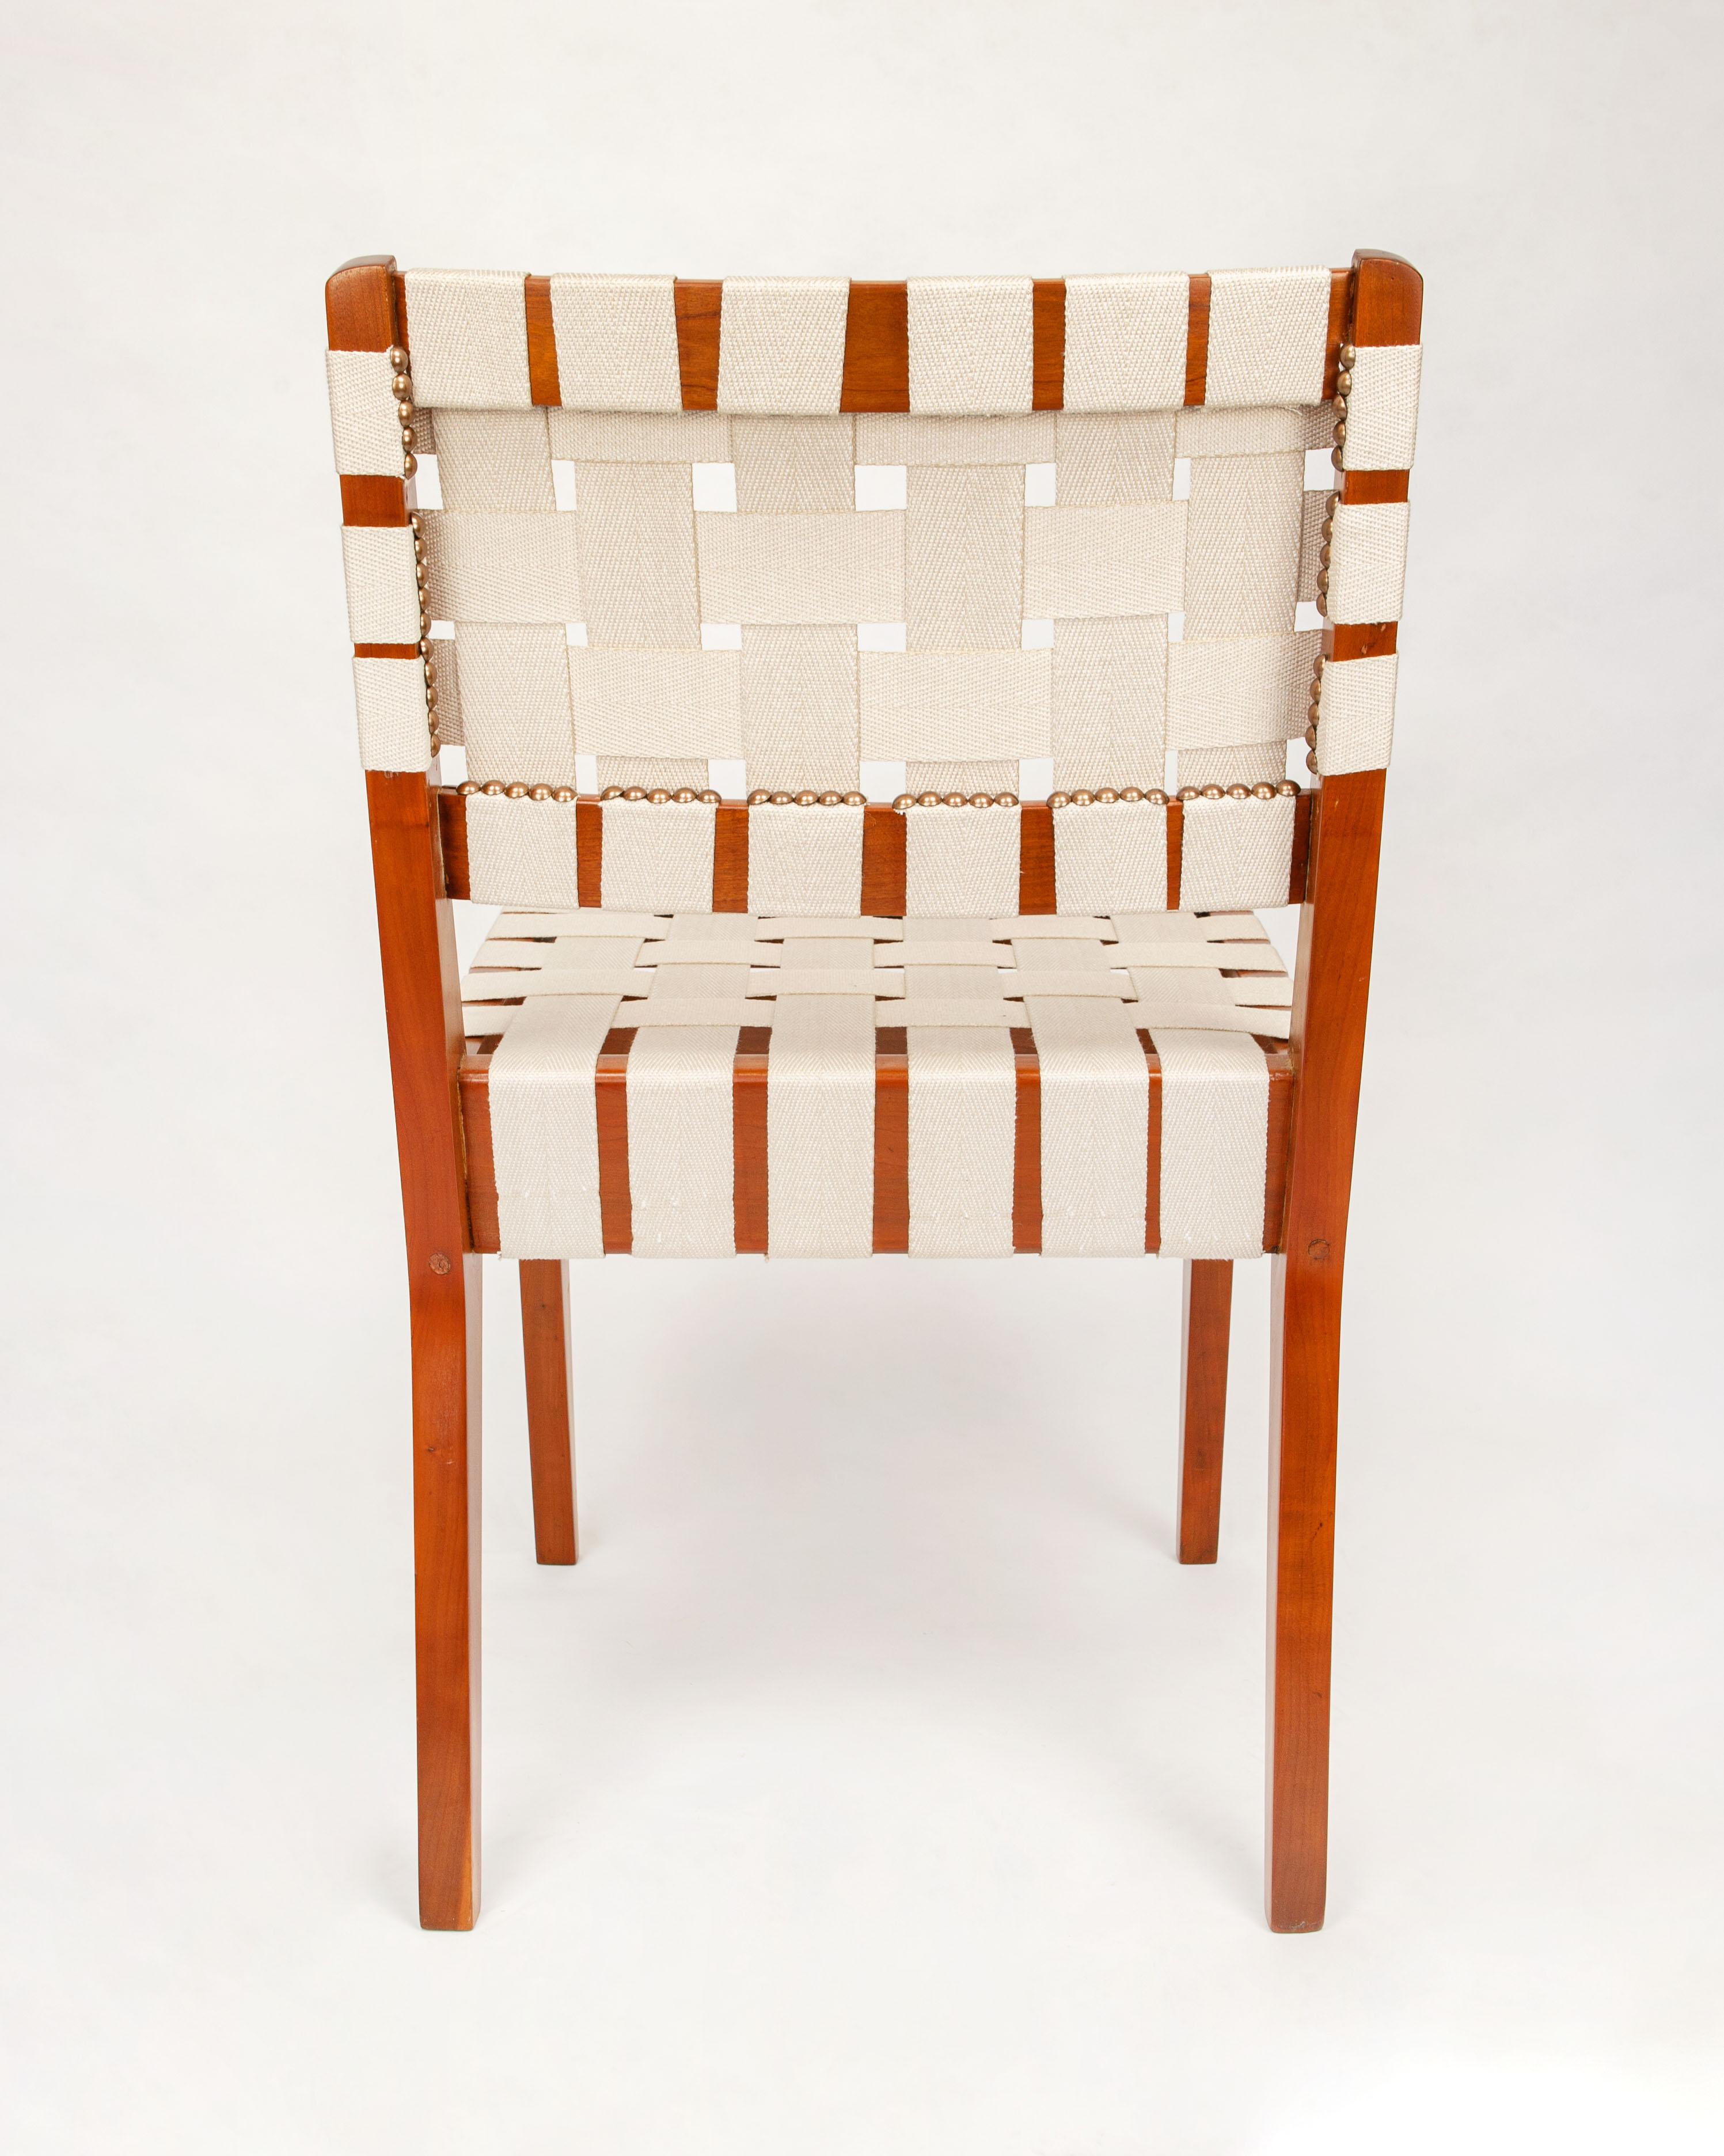 Classic Jens Risom for Knoll Midcentury Woven Side Chairs, Pair In Excellent Condition For Sale In Pasadena, CA